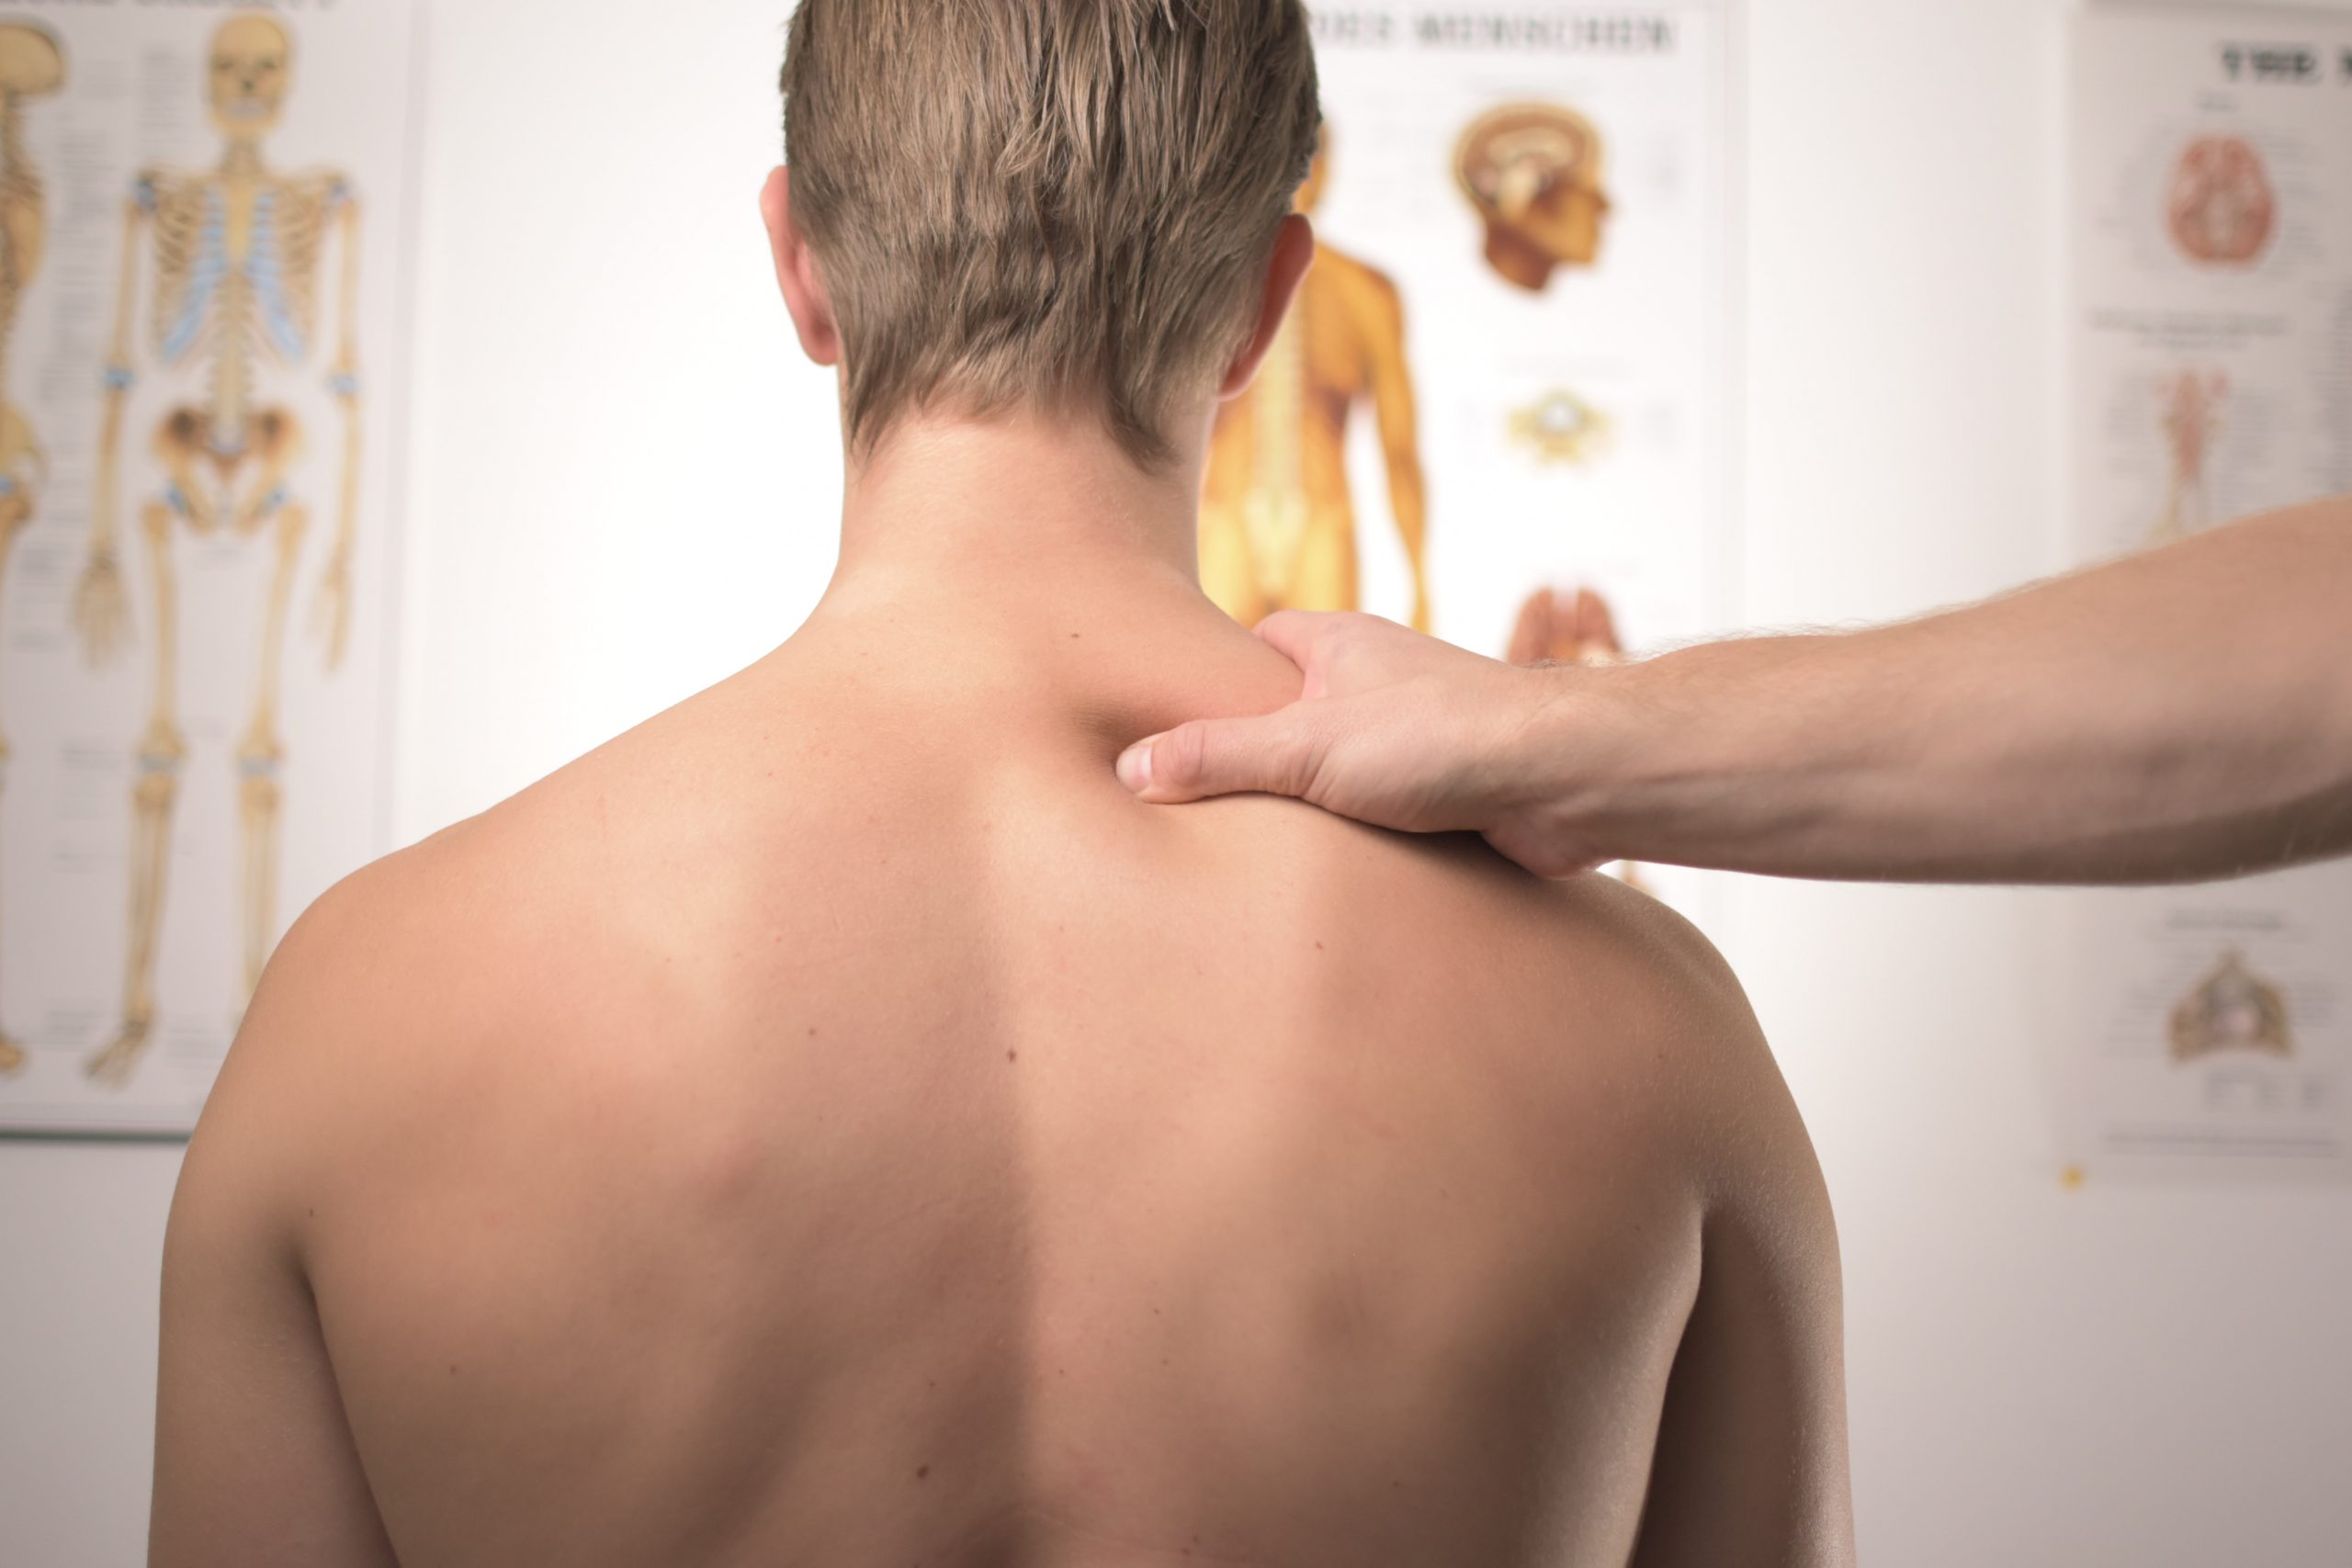 Man on medical examination with doctor checking his back